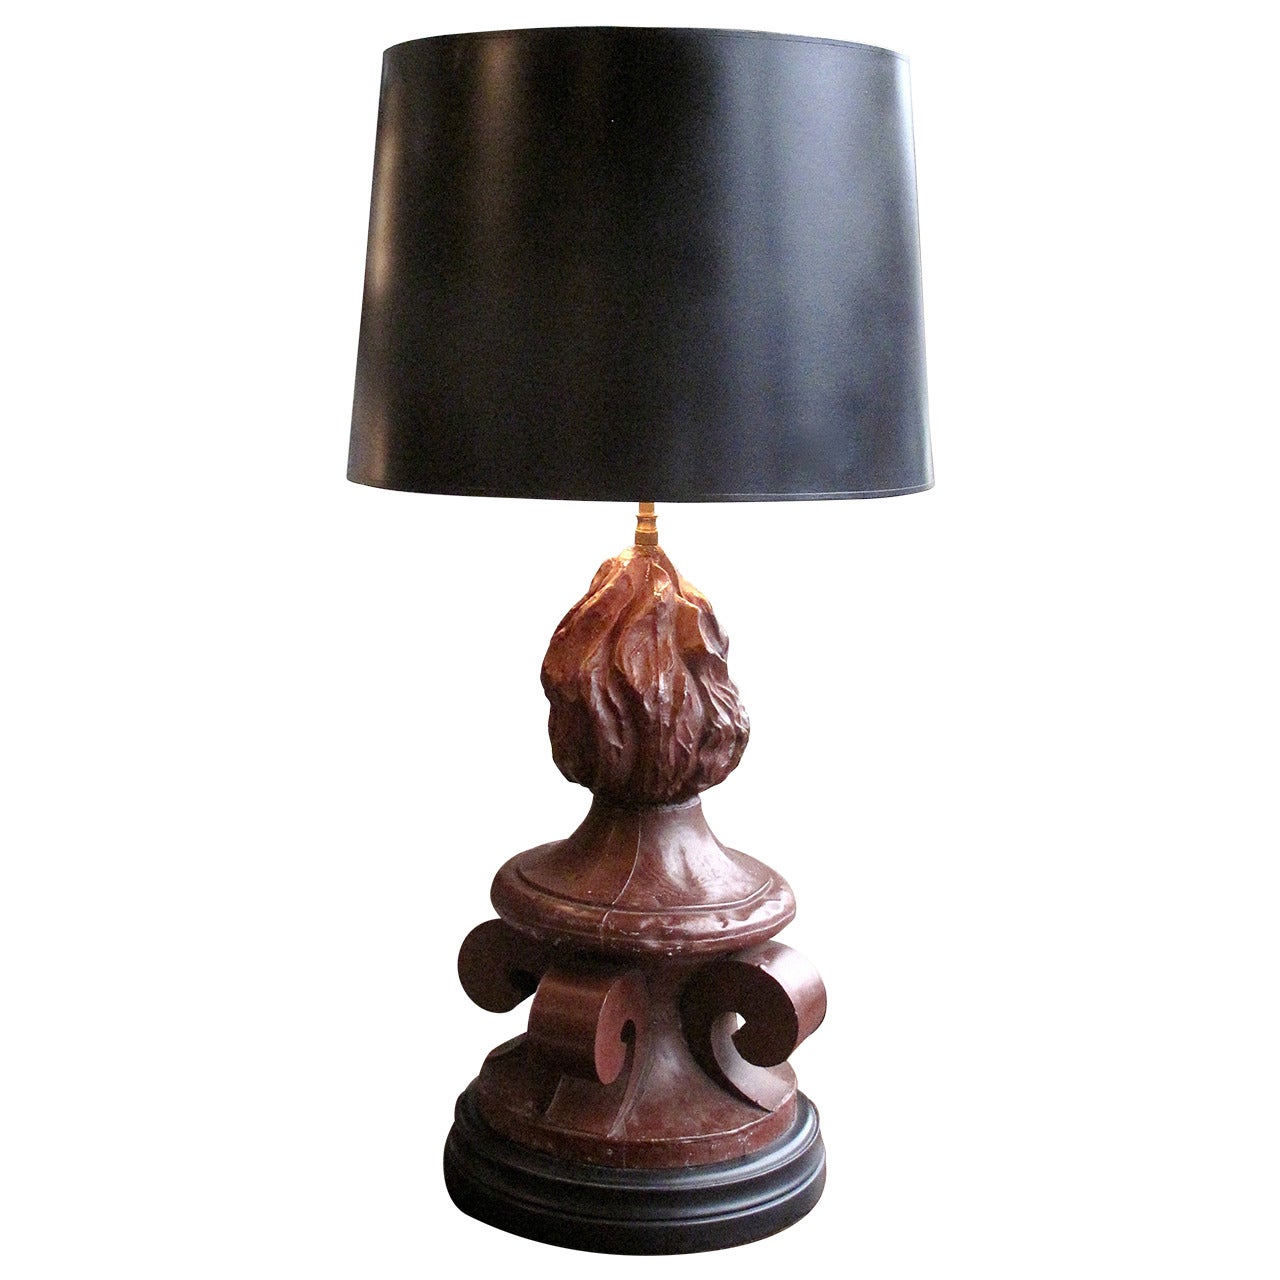 Large Architectural Element Lamp For Sale